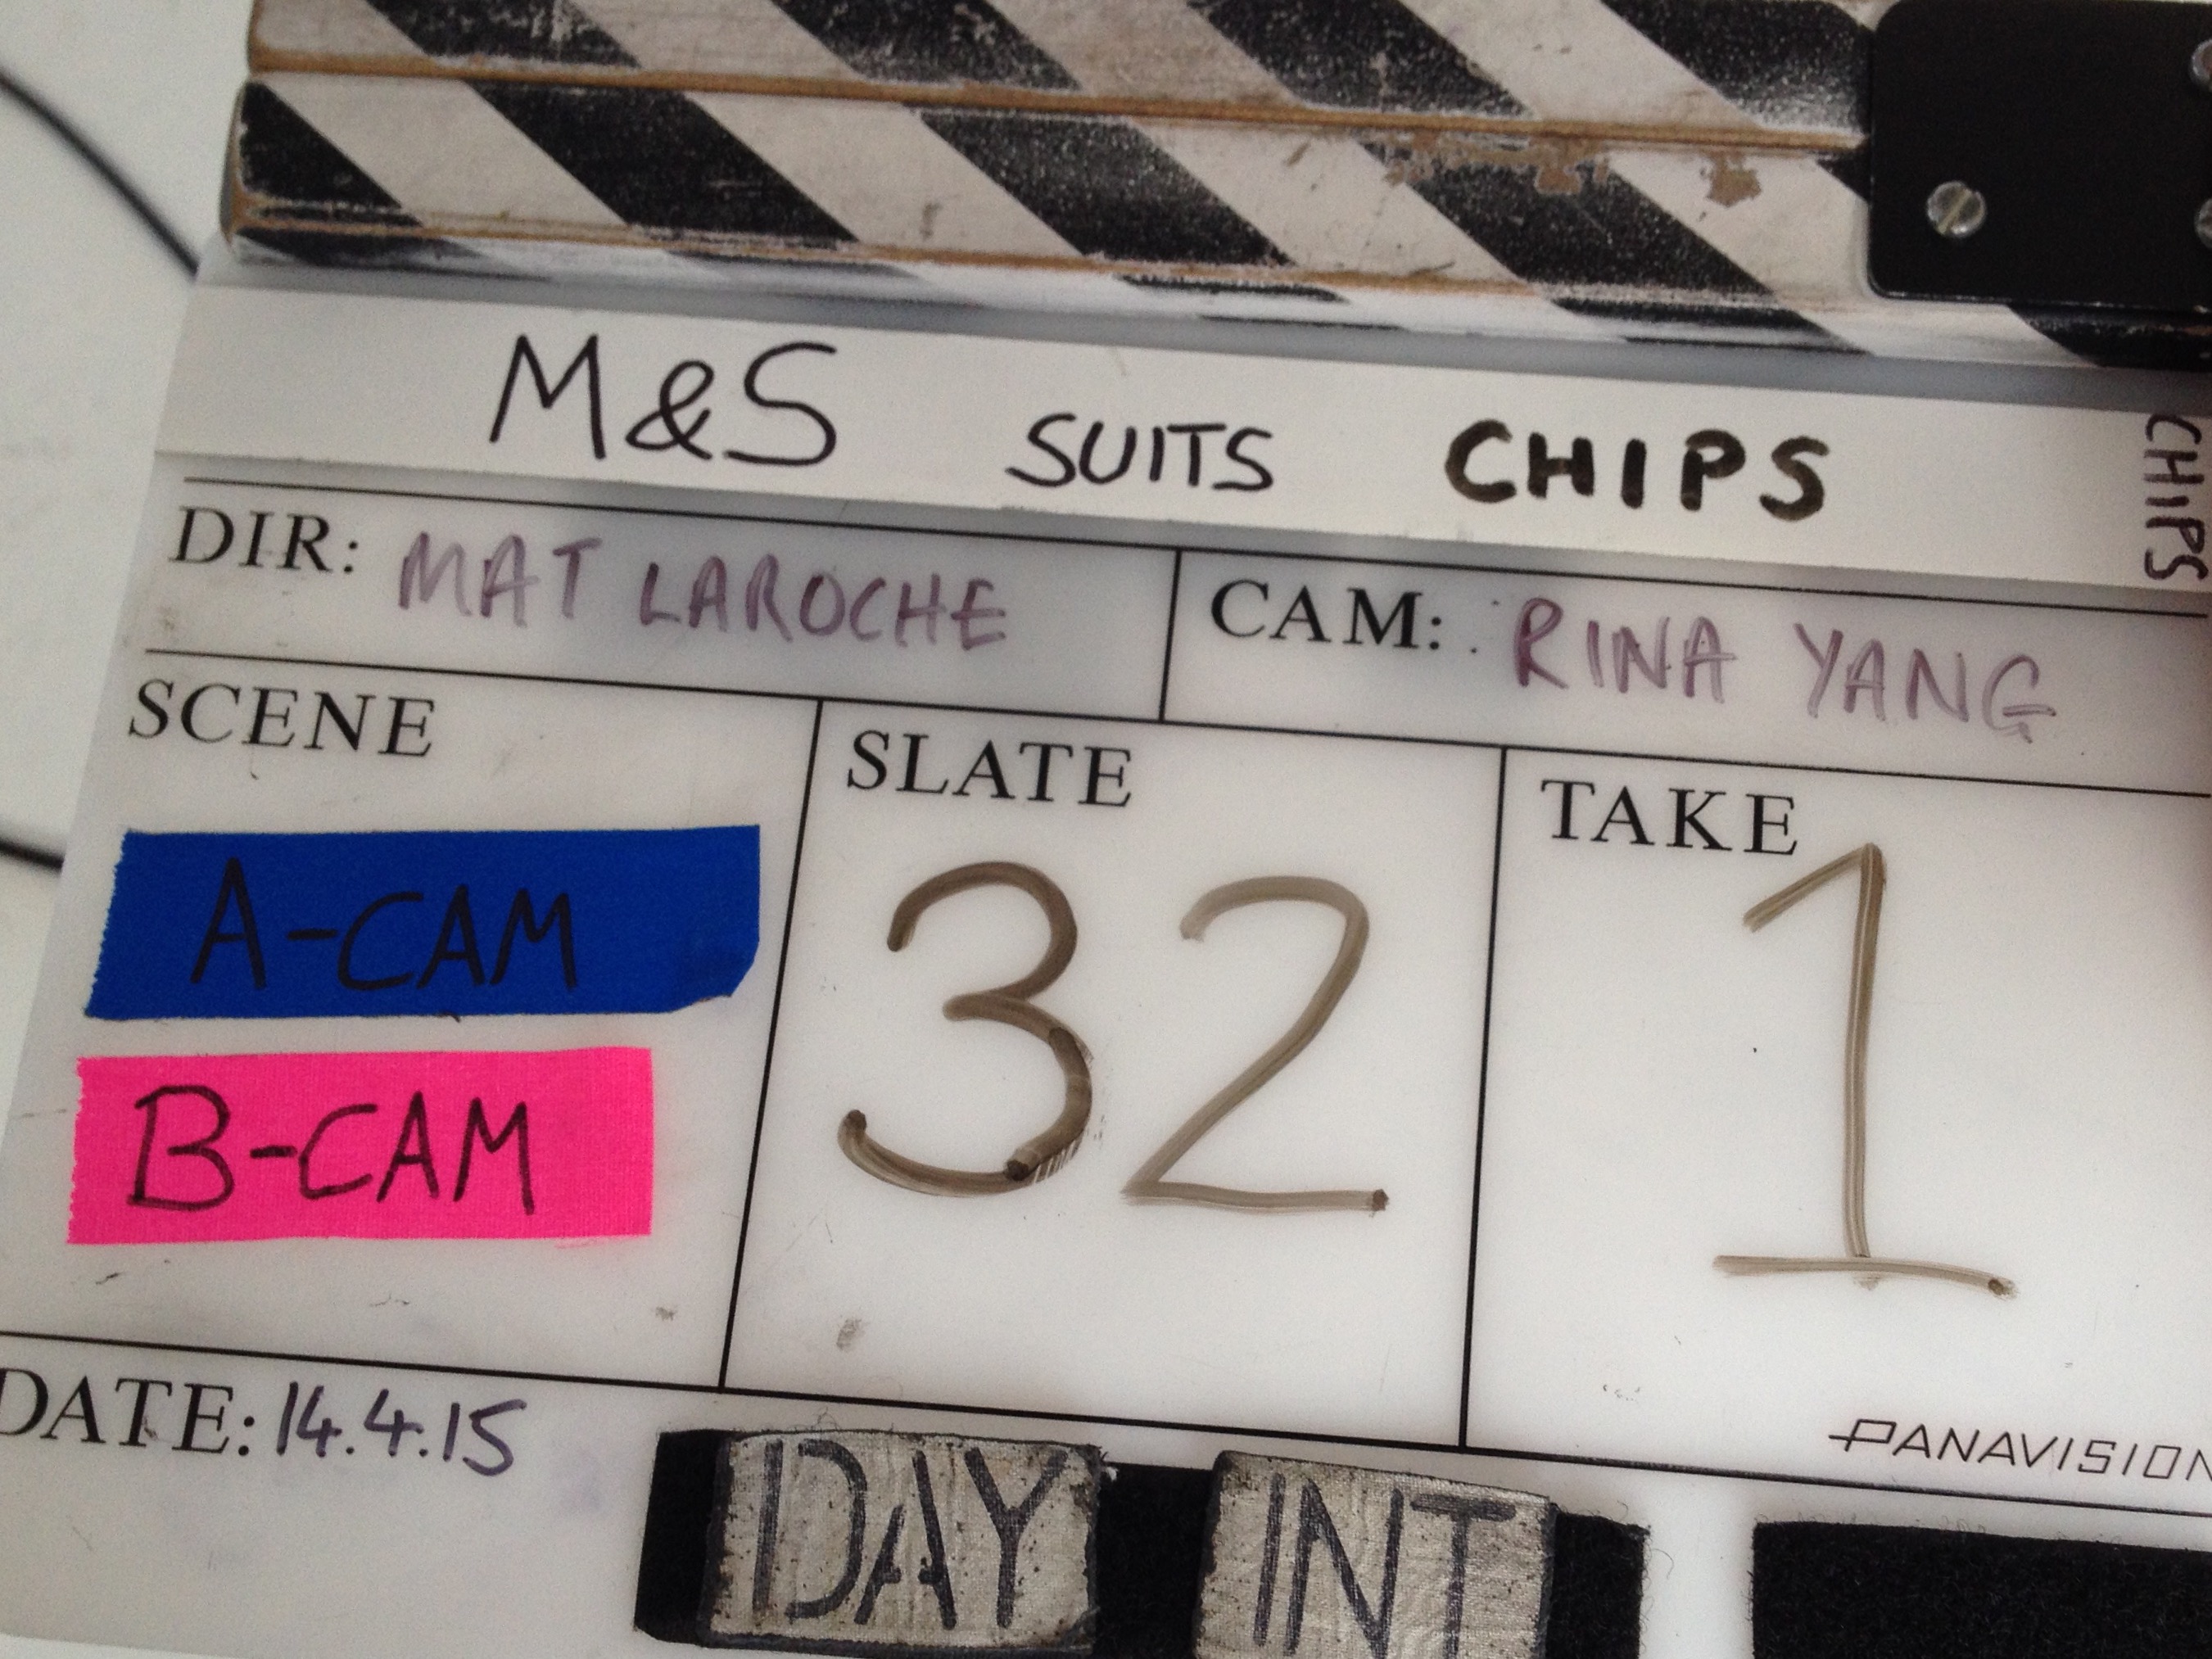 A slate from our latest M&S shoot.